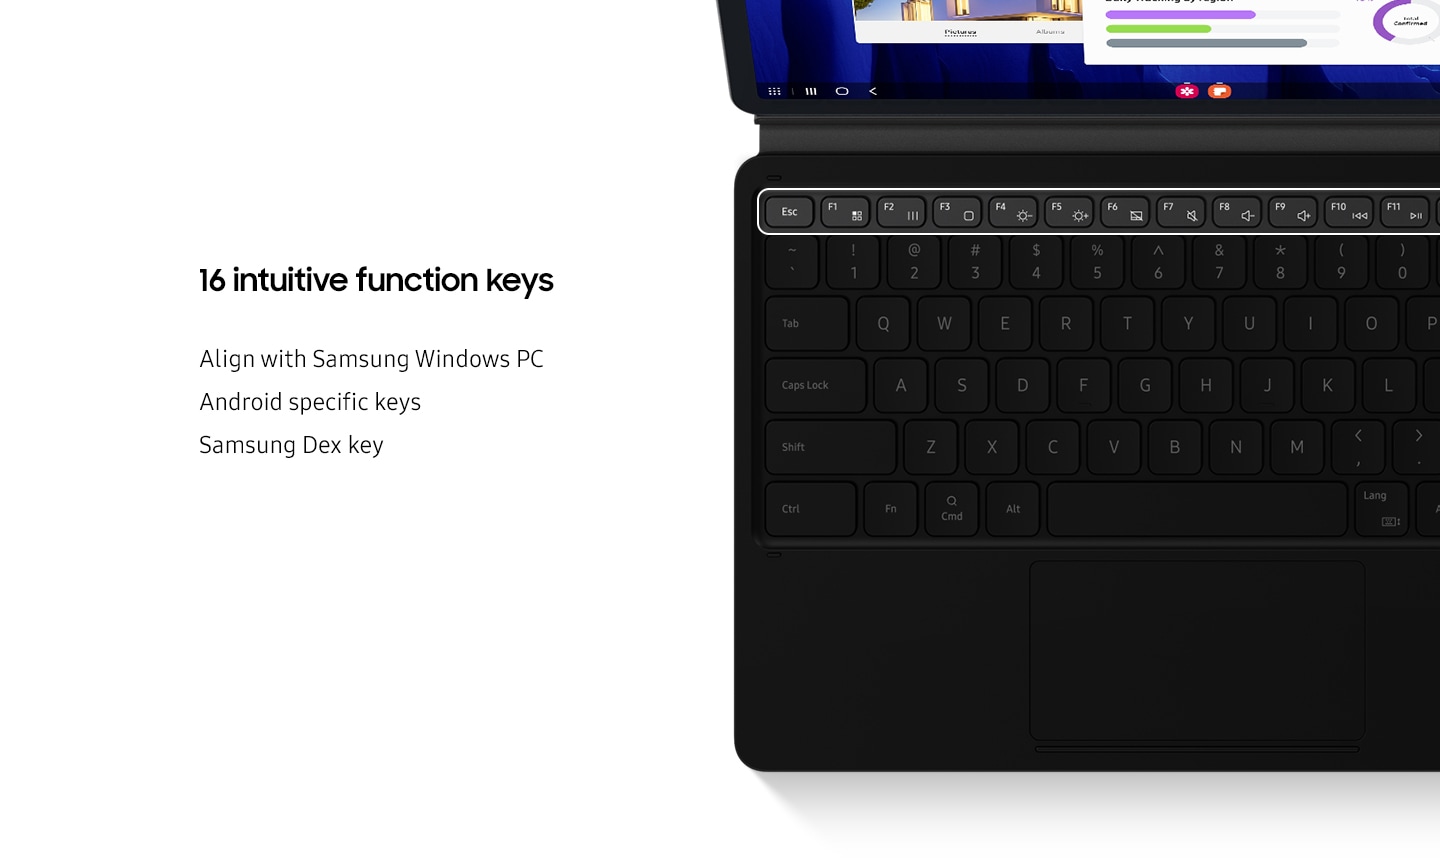 Highlighted 16 intuitive function keys. Align with Samsung Windows PC. Android specific keys. Samsung Dex key.